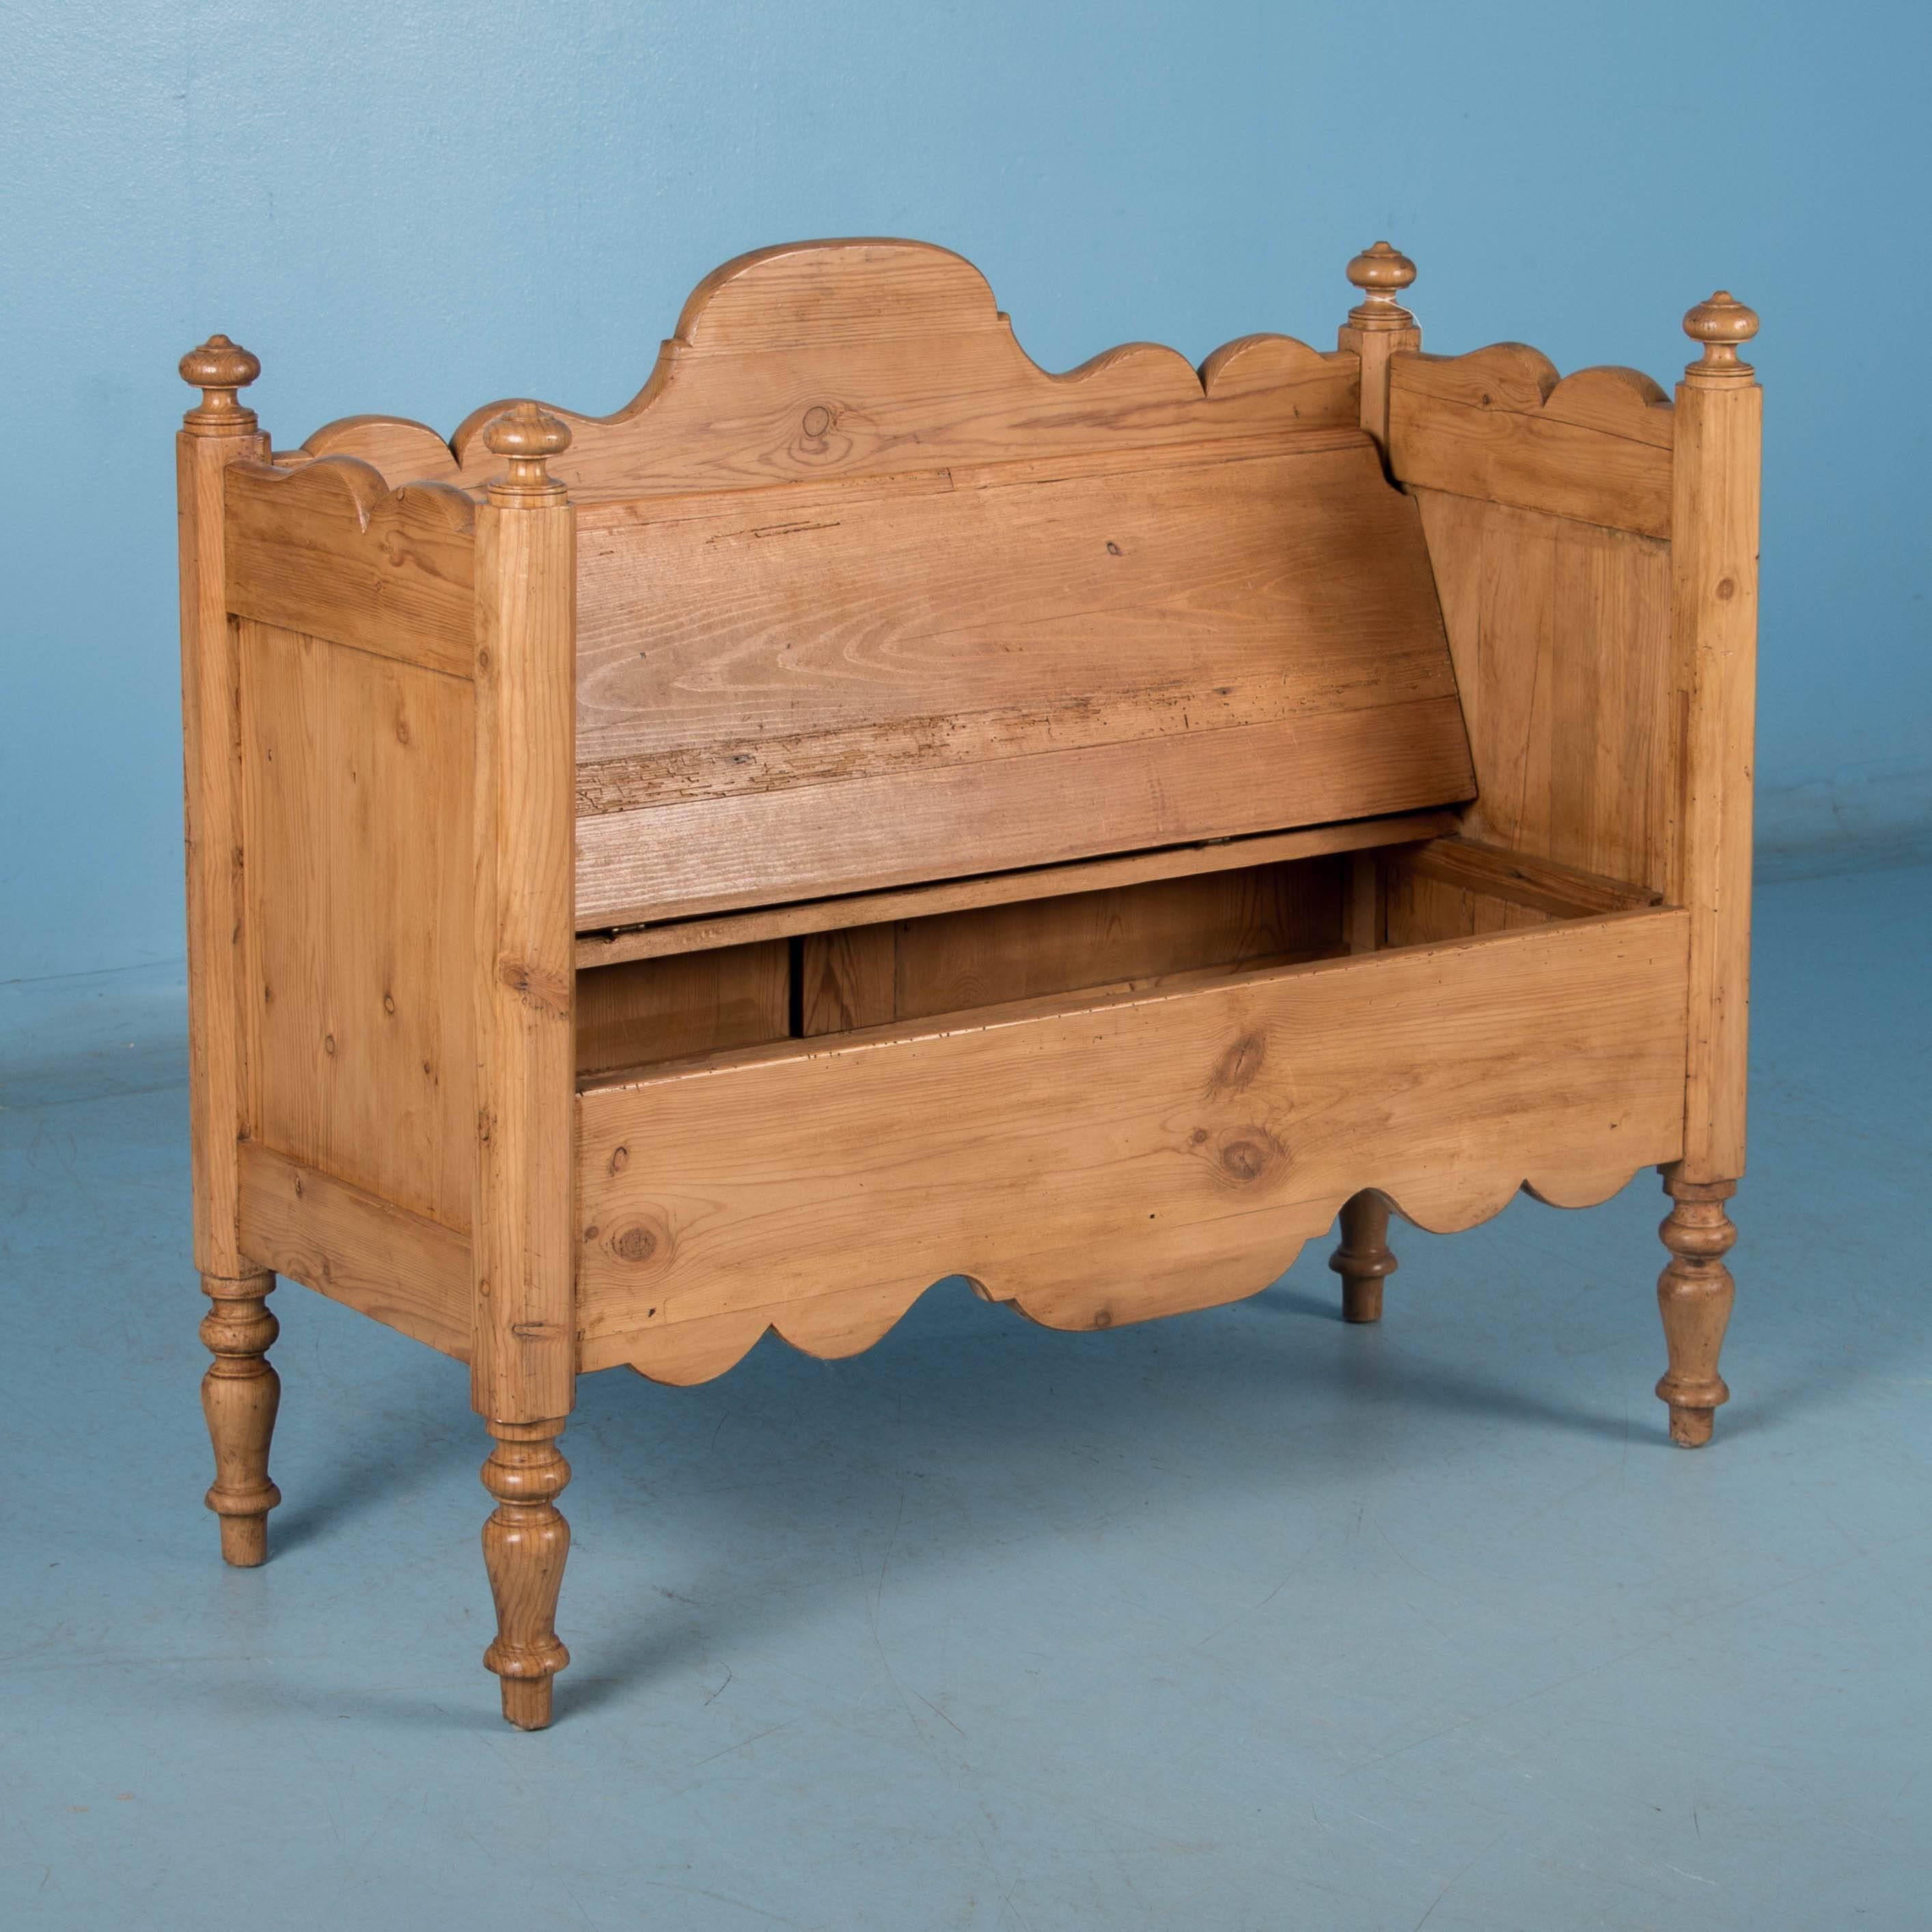 This delightful bench is styled after a traditional European bench of the 1800s- early 1900s. Benches of that era were usually around 6' long, so this bench provides all the charm and function in under 4' of length. It has been given a wax finish